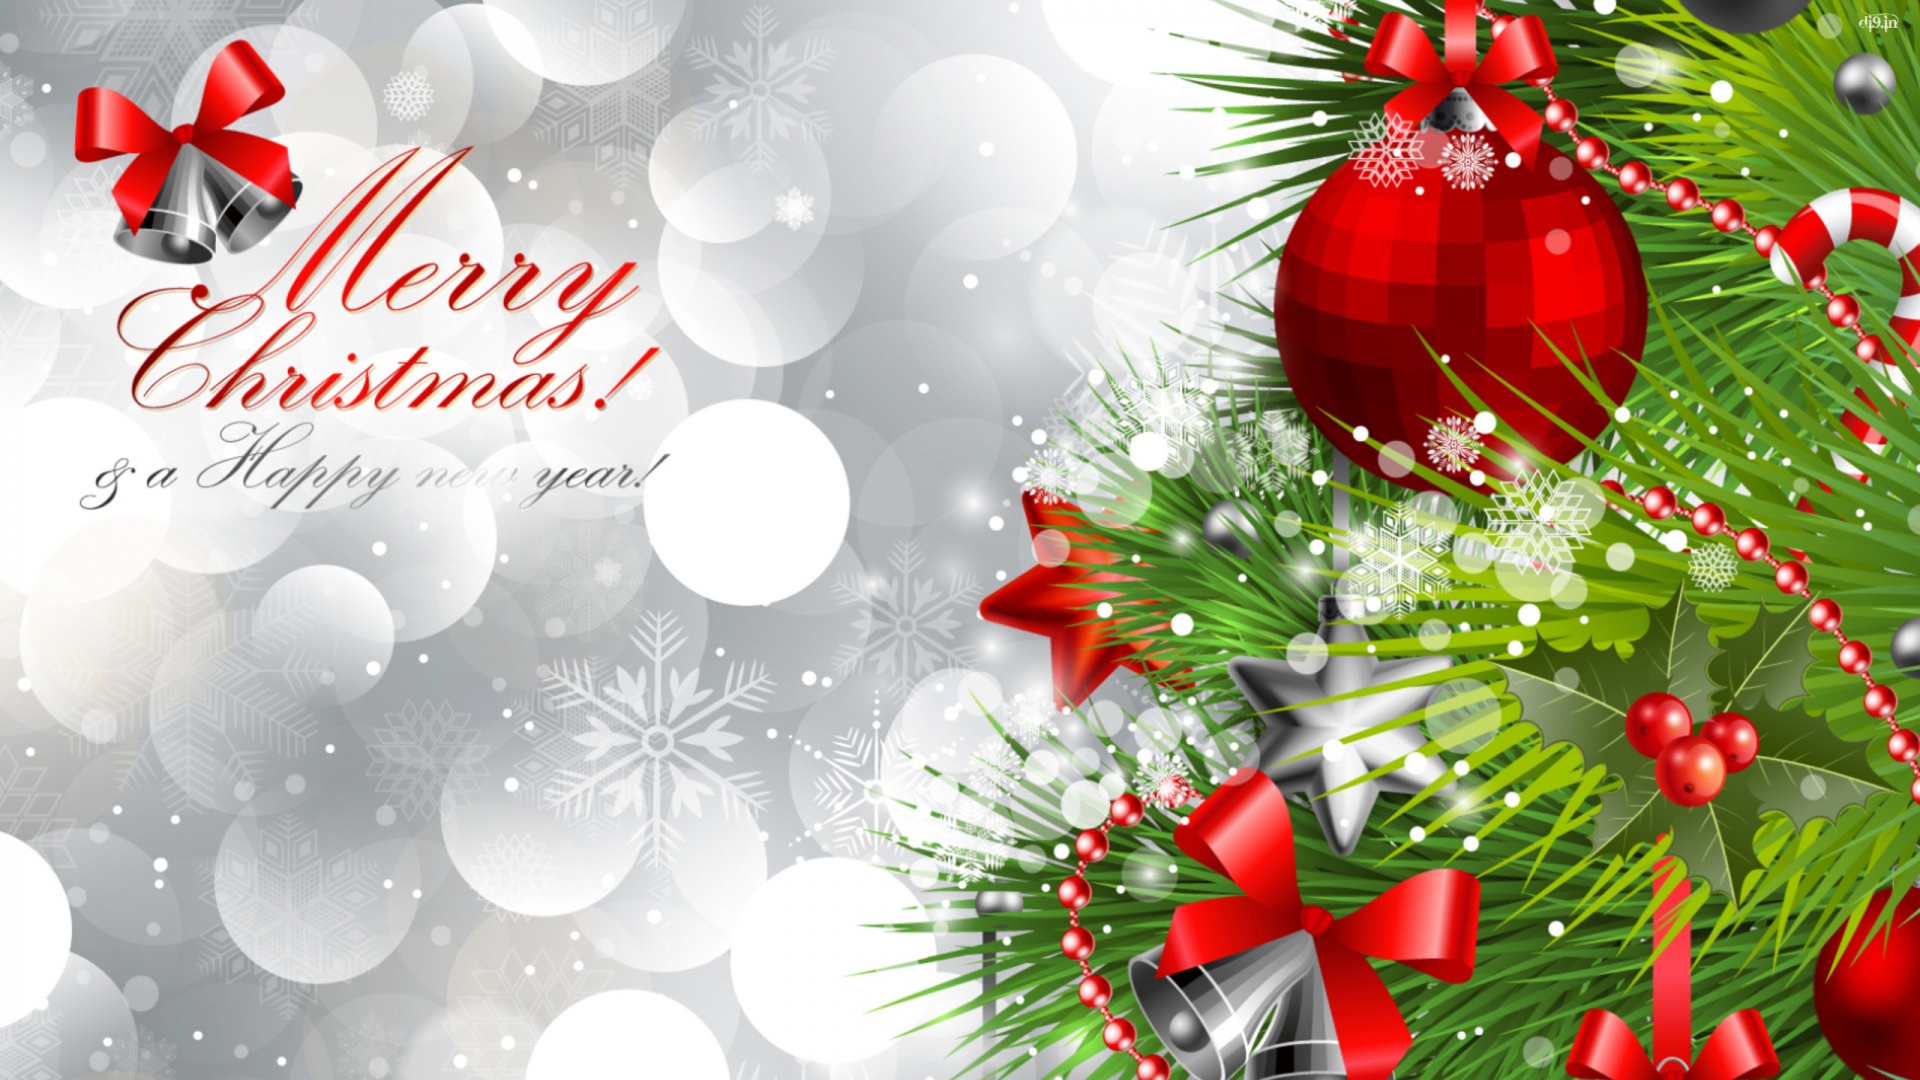 Christmas New Year Greetings Images Free Download